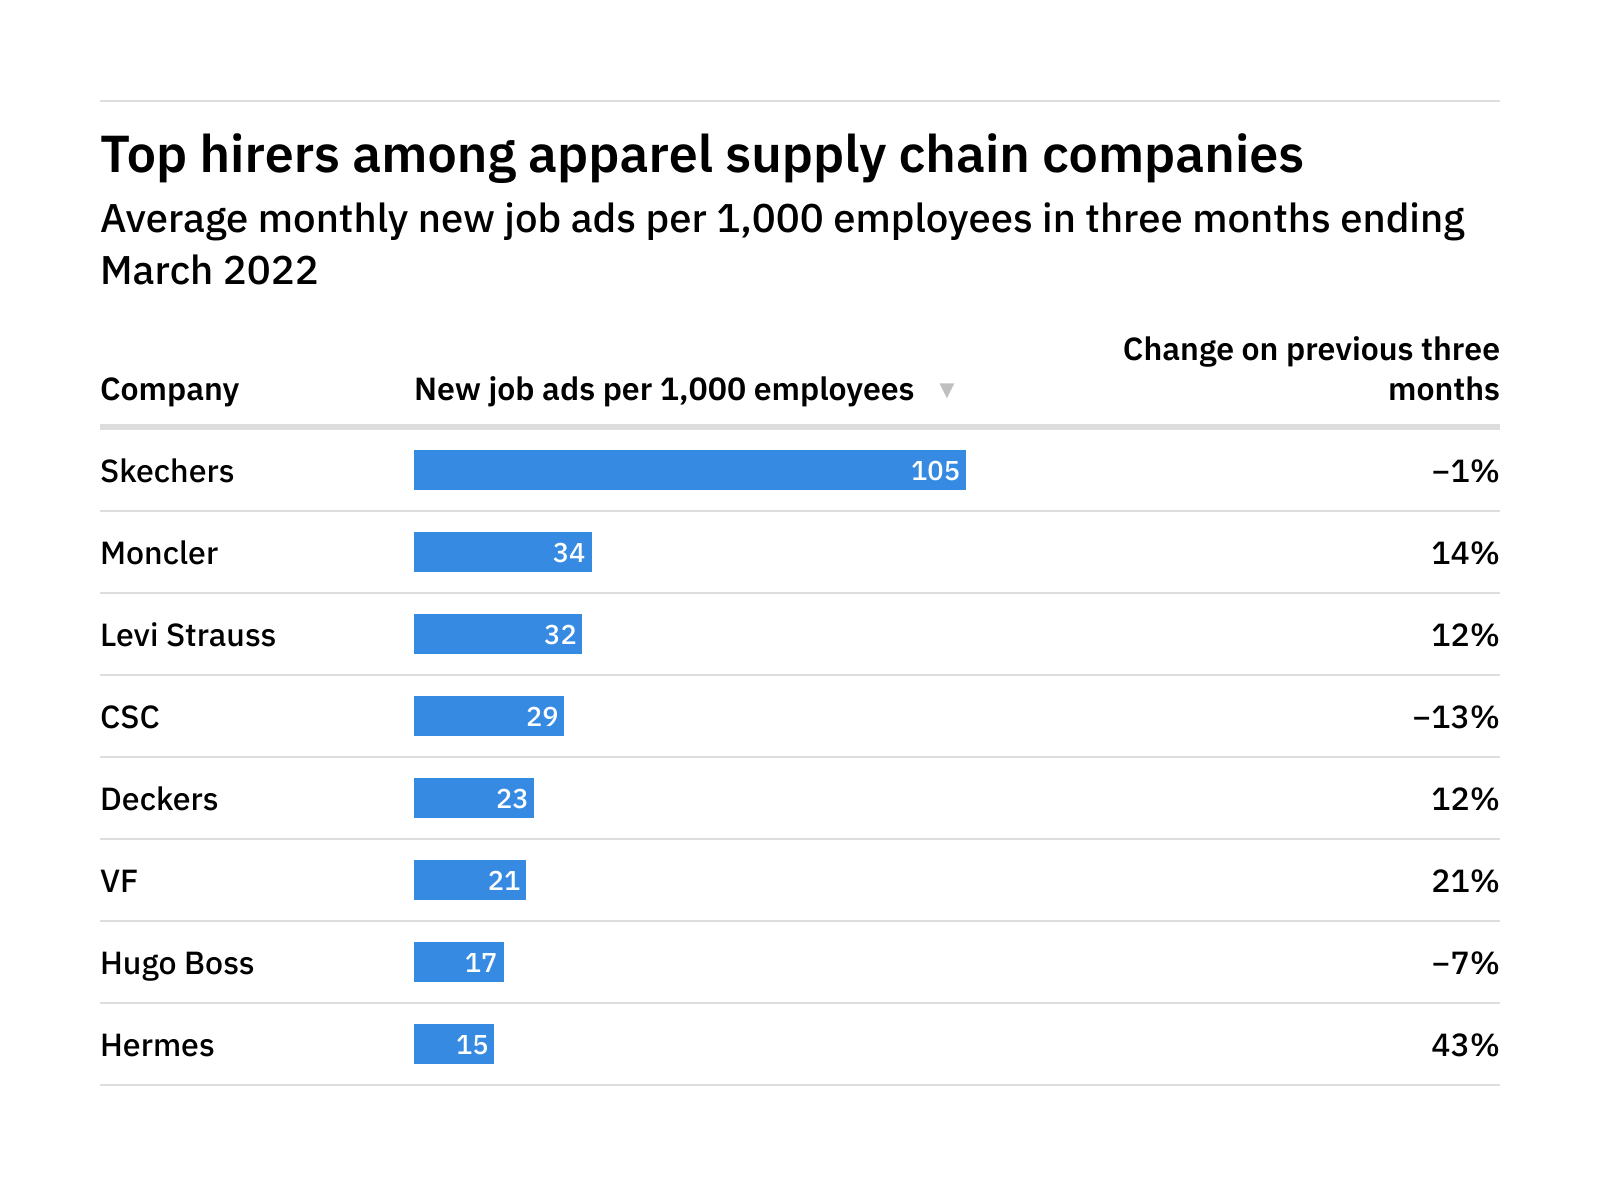 Skechers tops hiring leaderboard for apparel supply chain